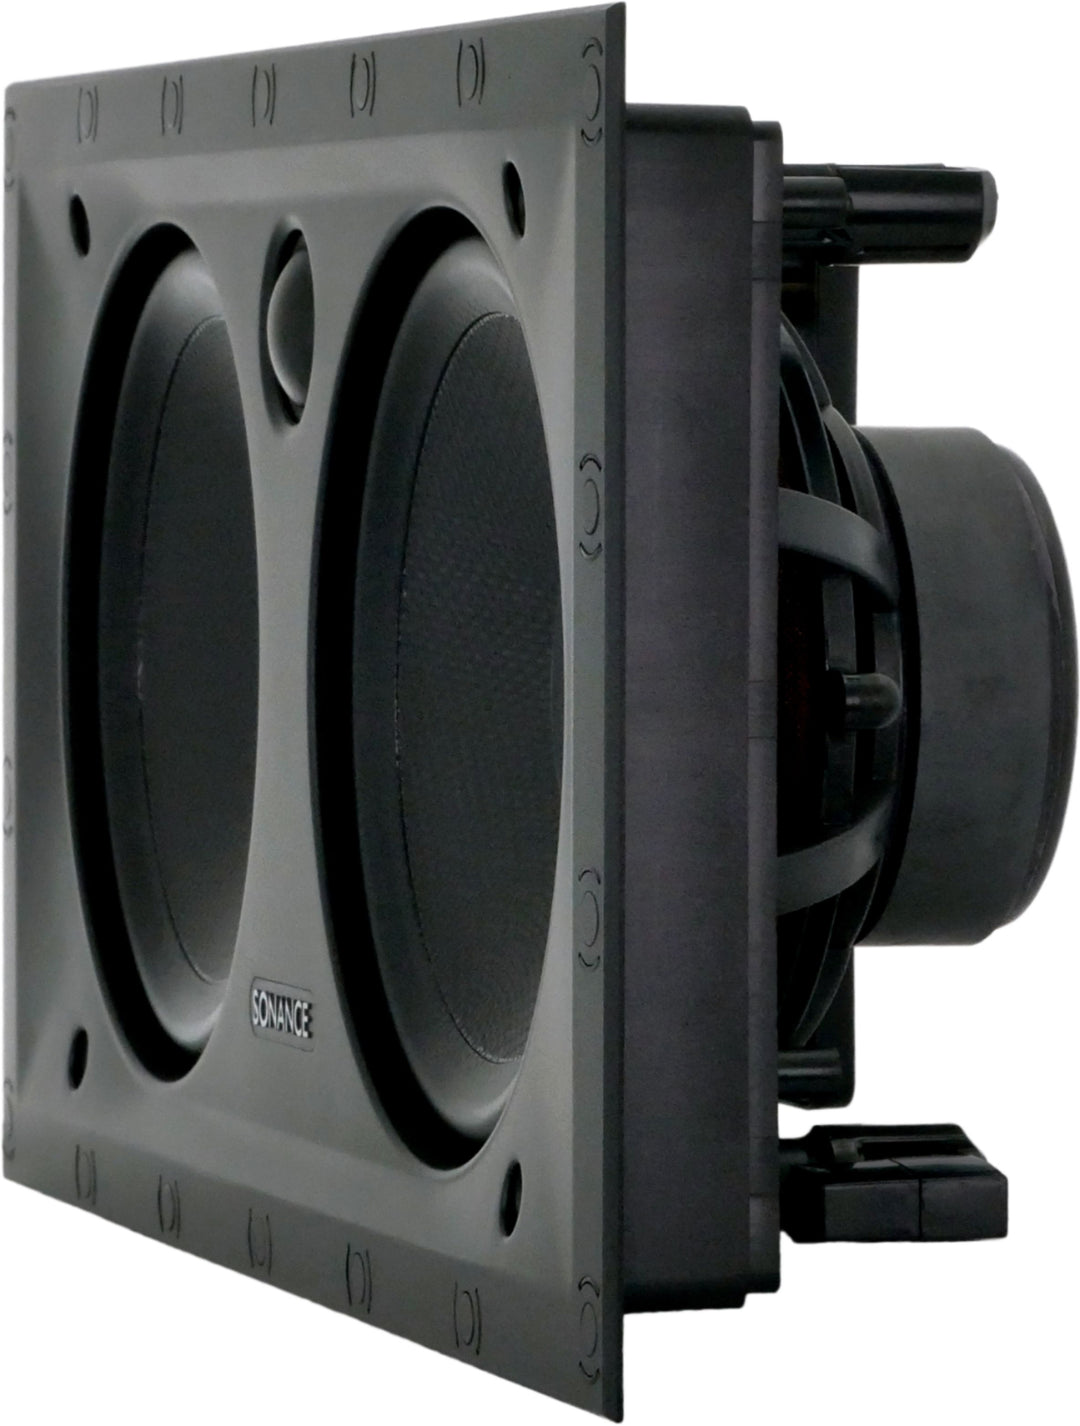 Sonance - MAG Series  5.1-Ch. Premium 6-1/2" In-Wall Surround Sound Speaker System with Wireless Subwoofer - Paintable White_3